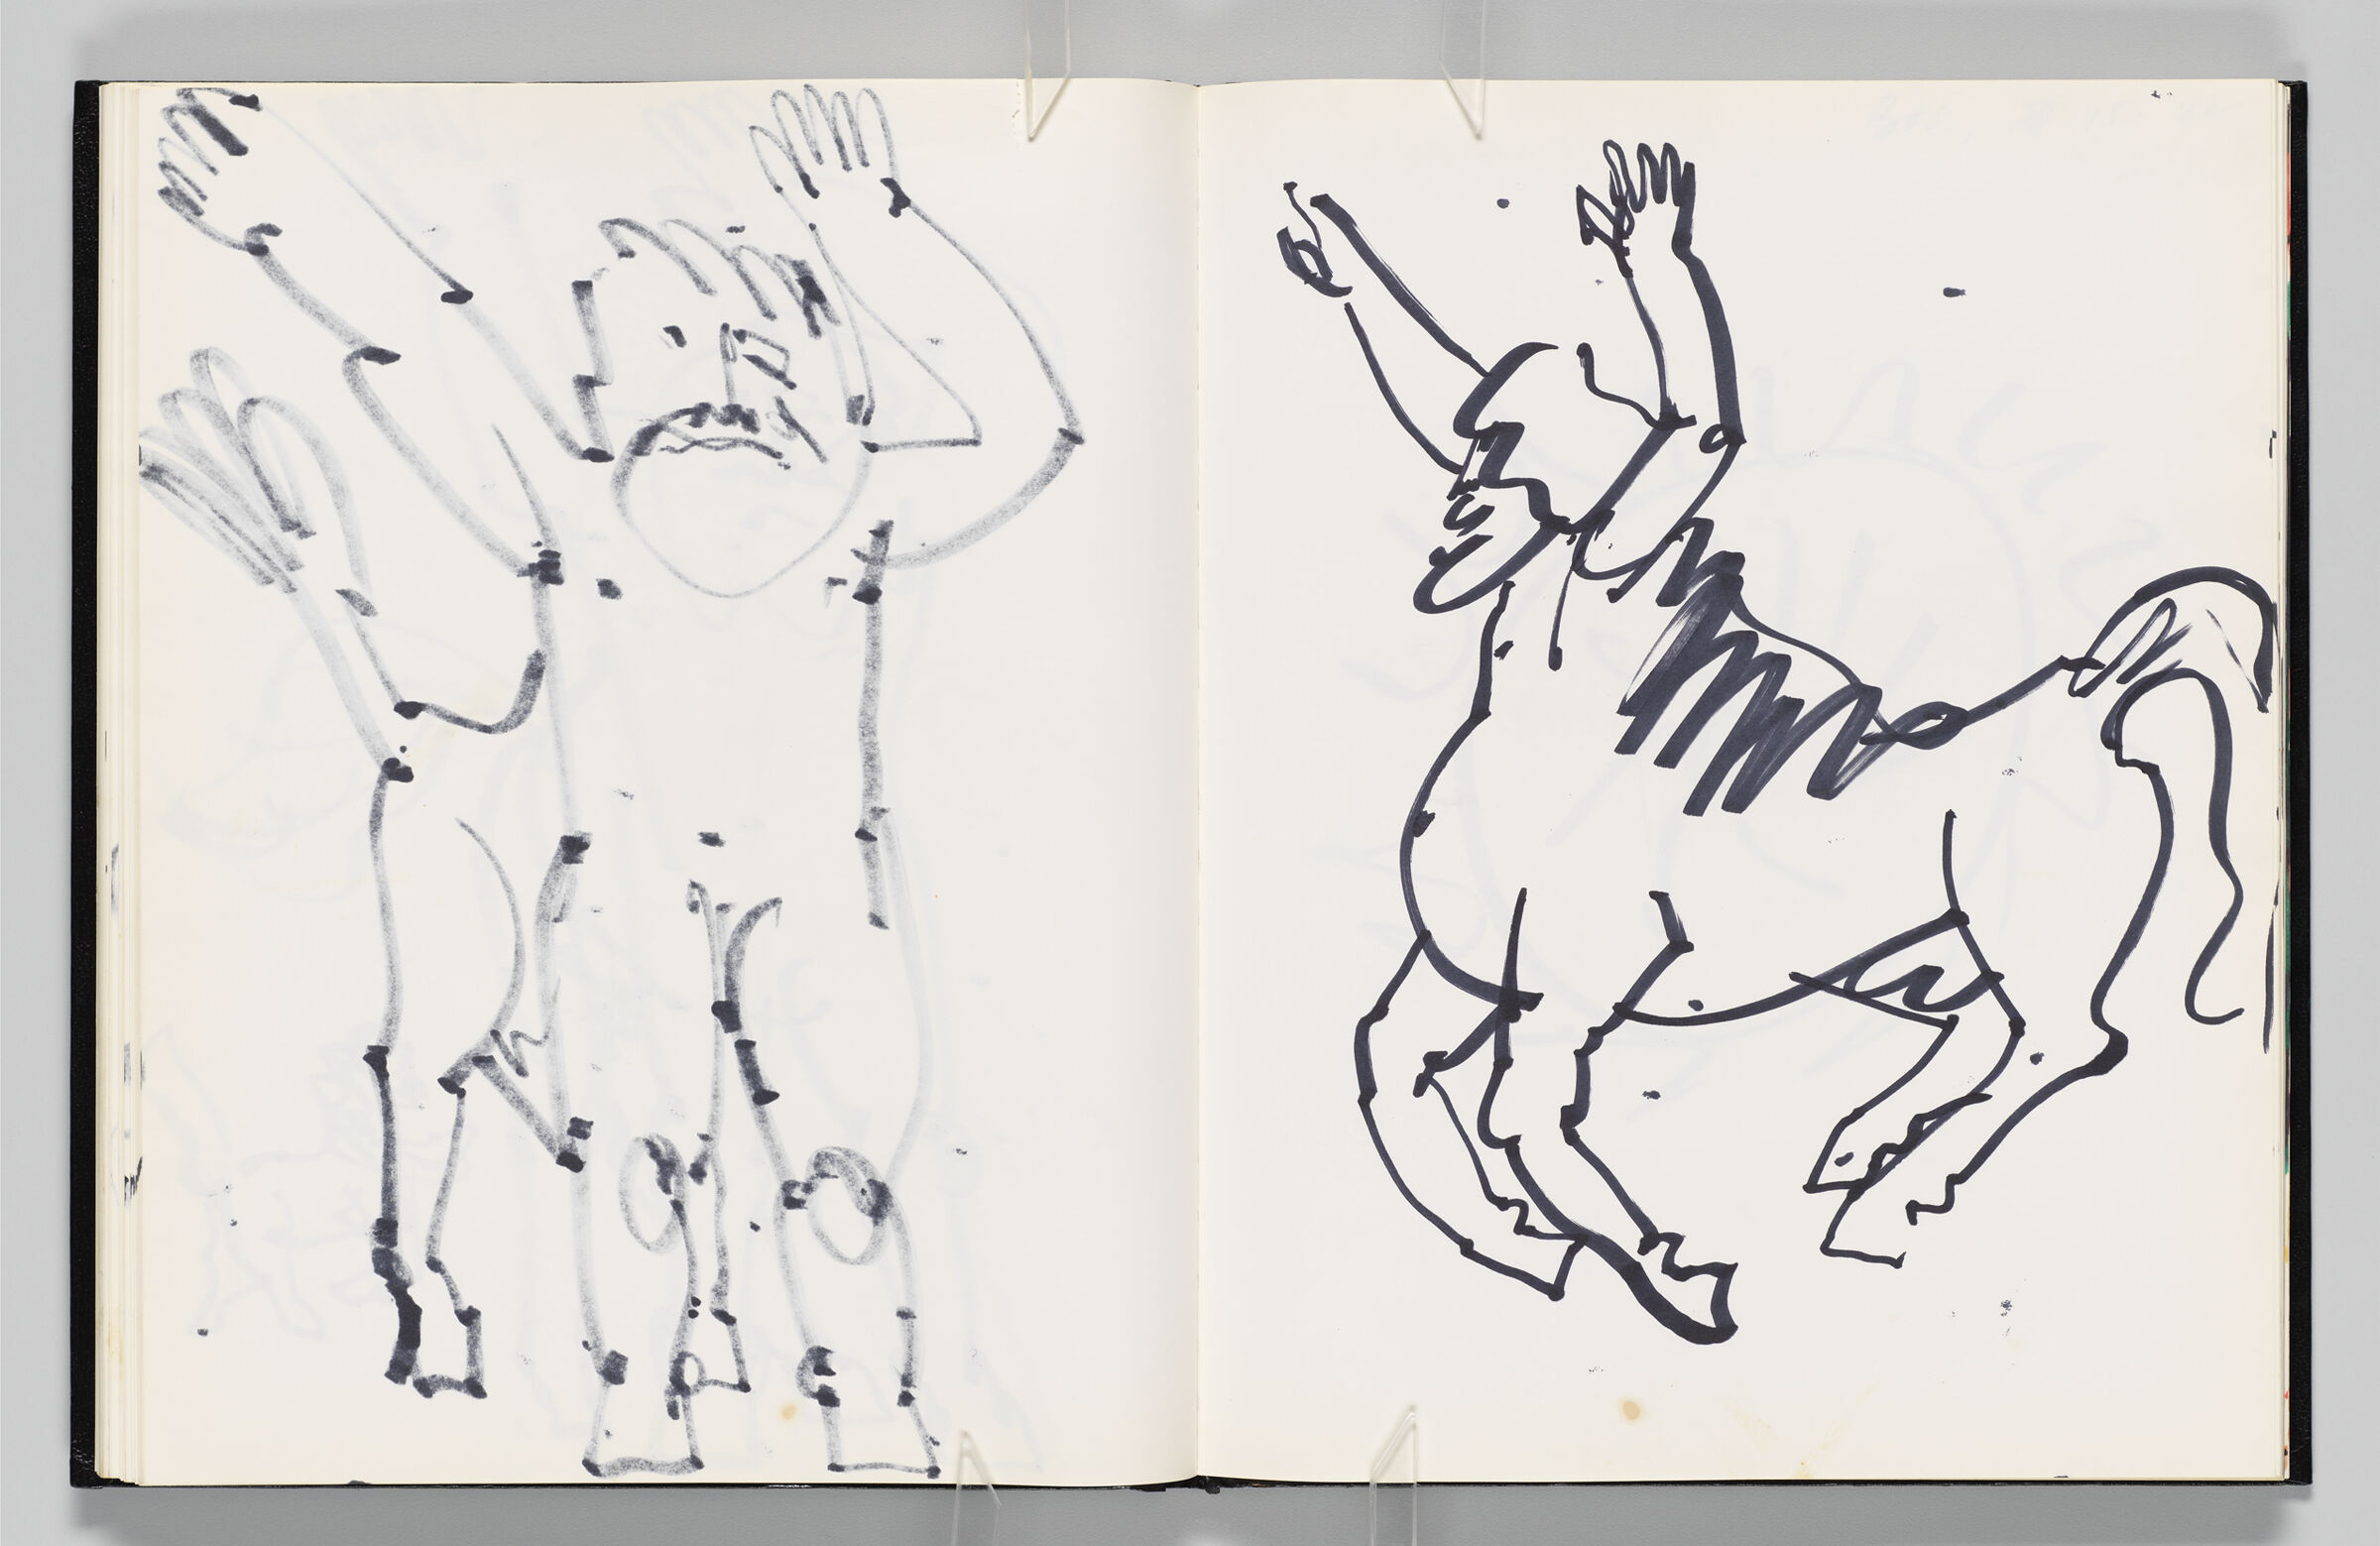 Untitled (Bleed-Through Of Previous Page, Left Page); Untitled (Centaur, Right Page)